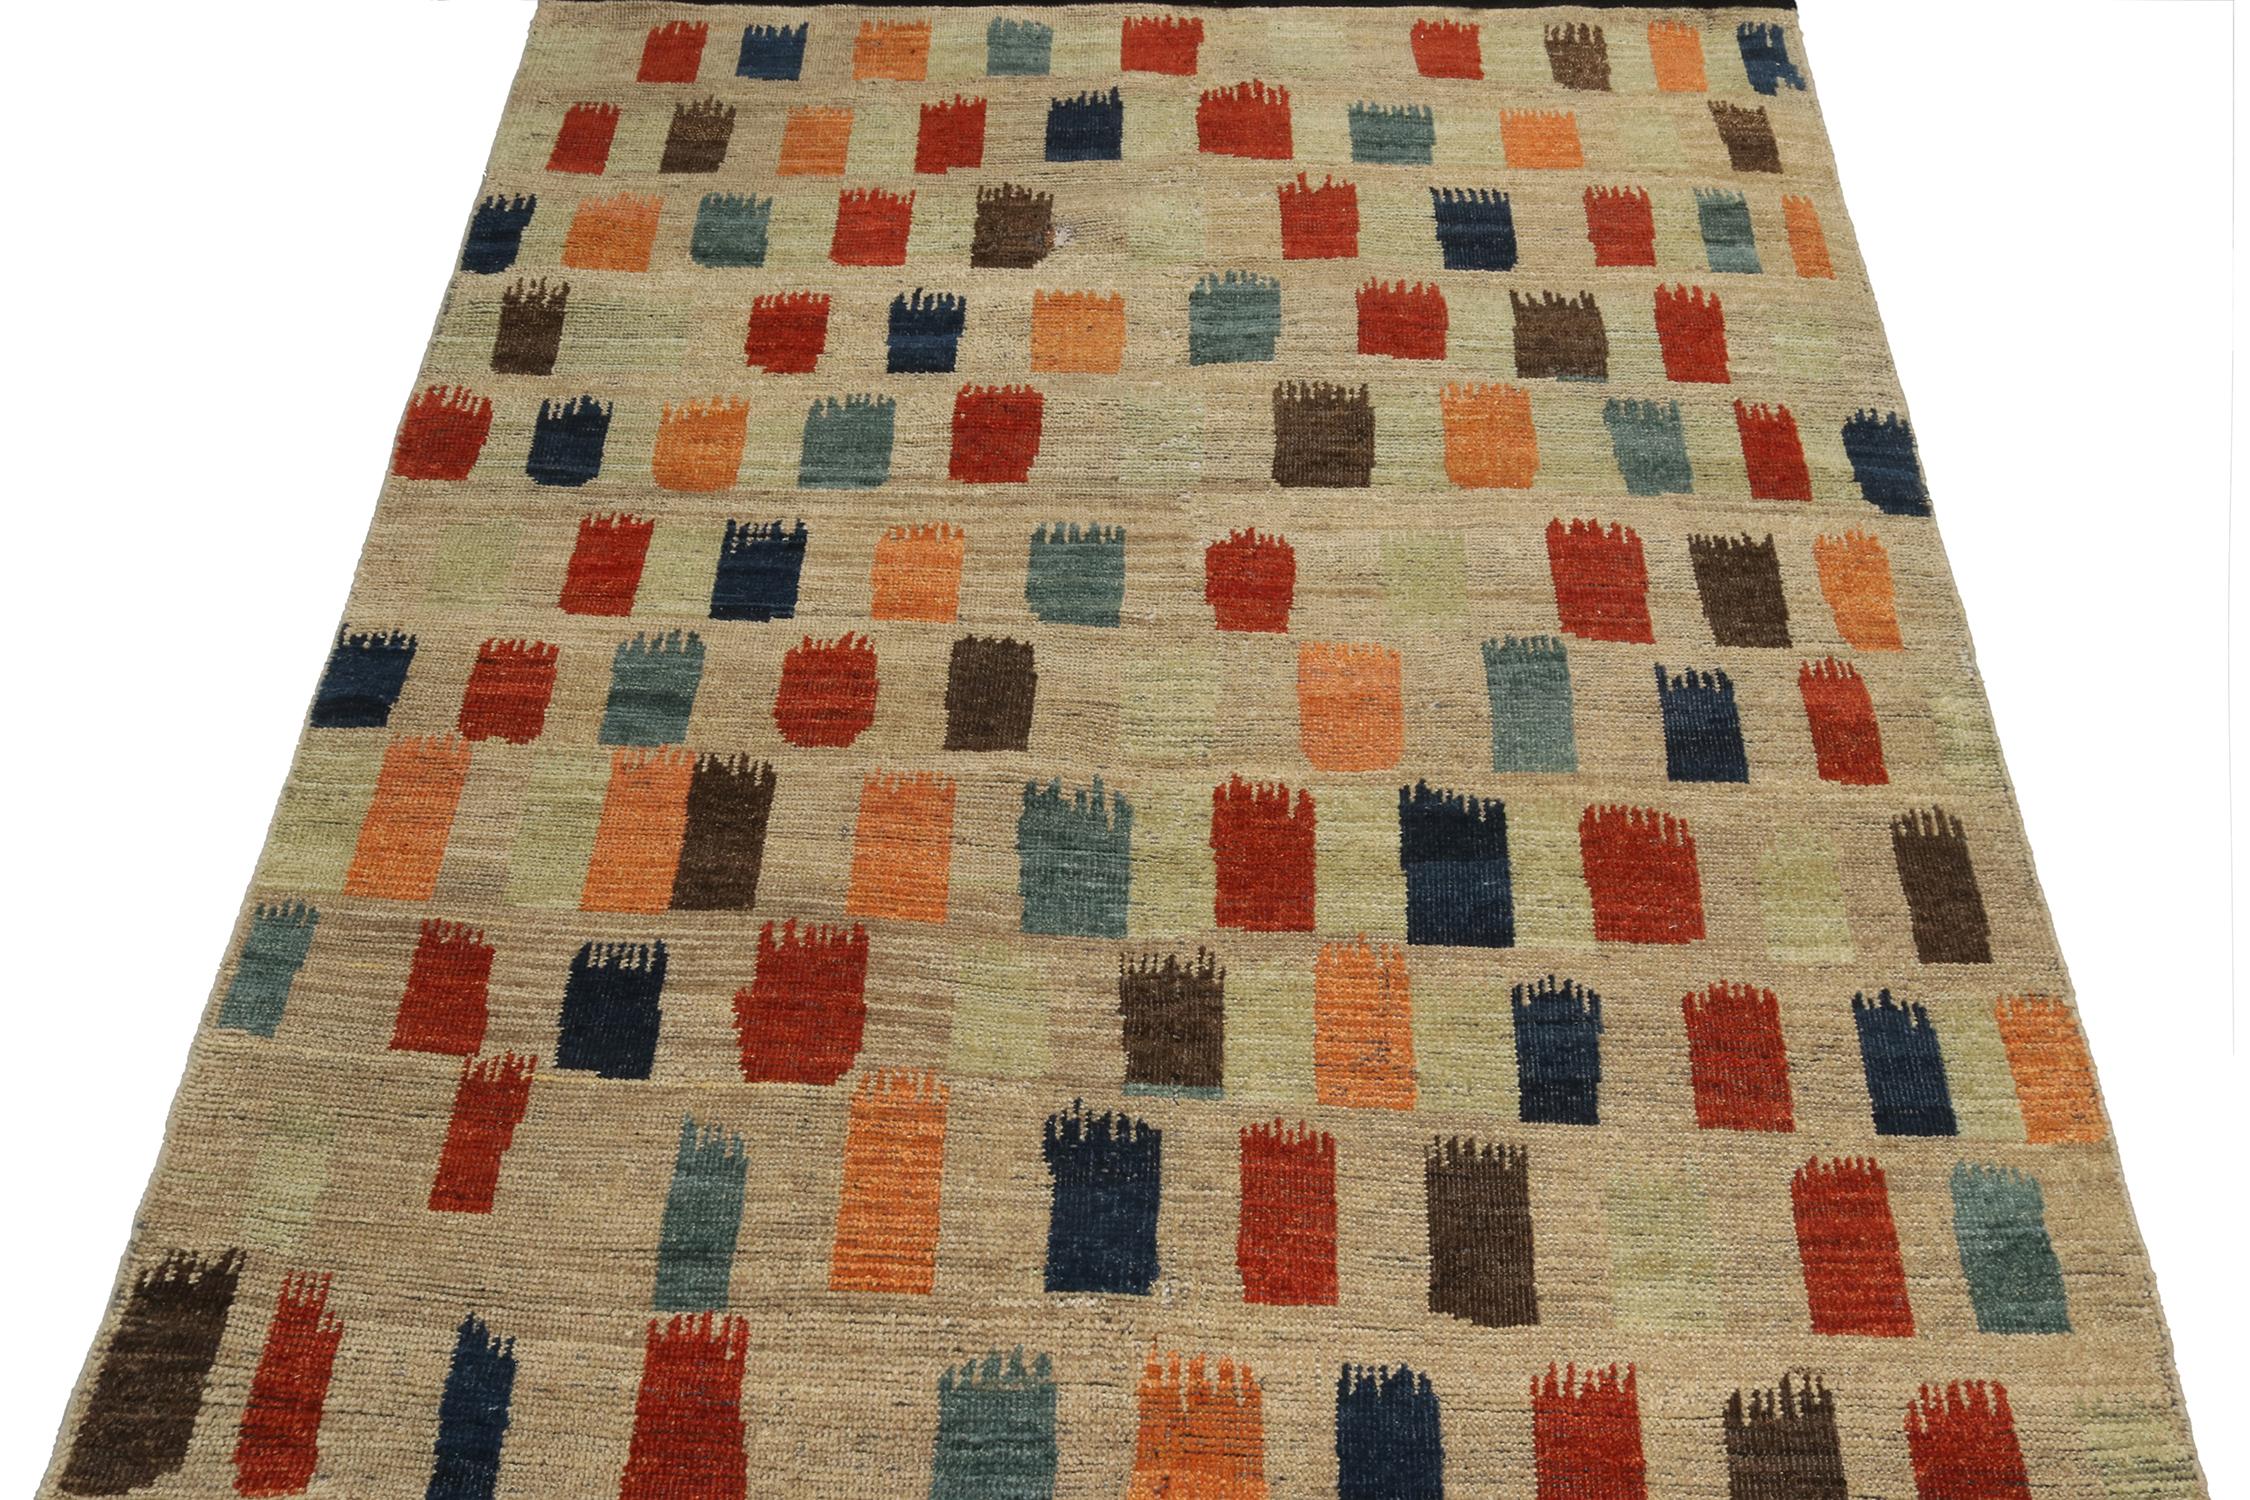 Tabriz Rug & Kilim’s Tribal Style Rug in Beige-Brown with Vibrant Geometric Pattern For Sale